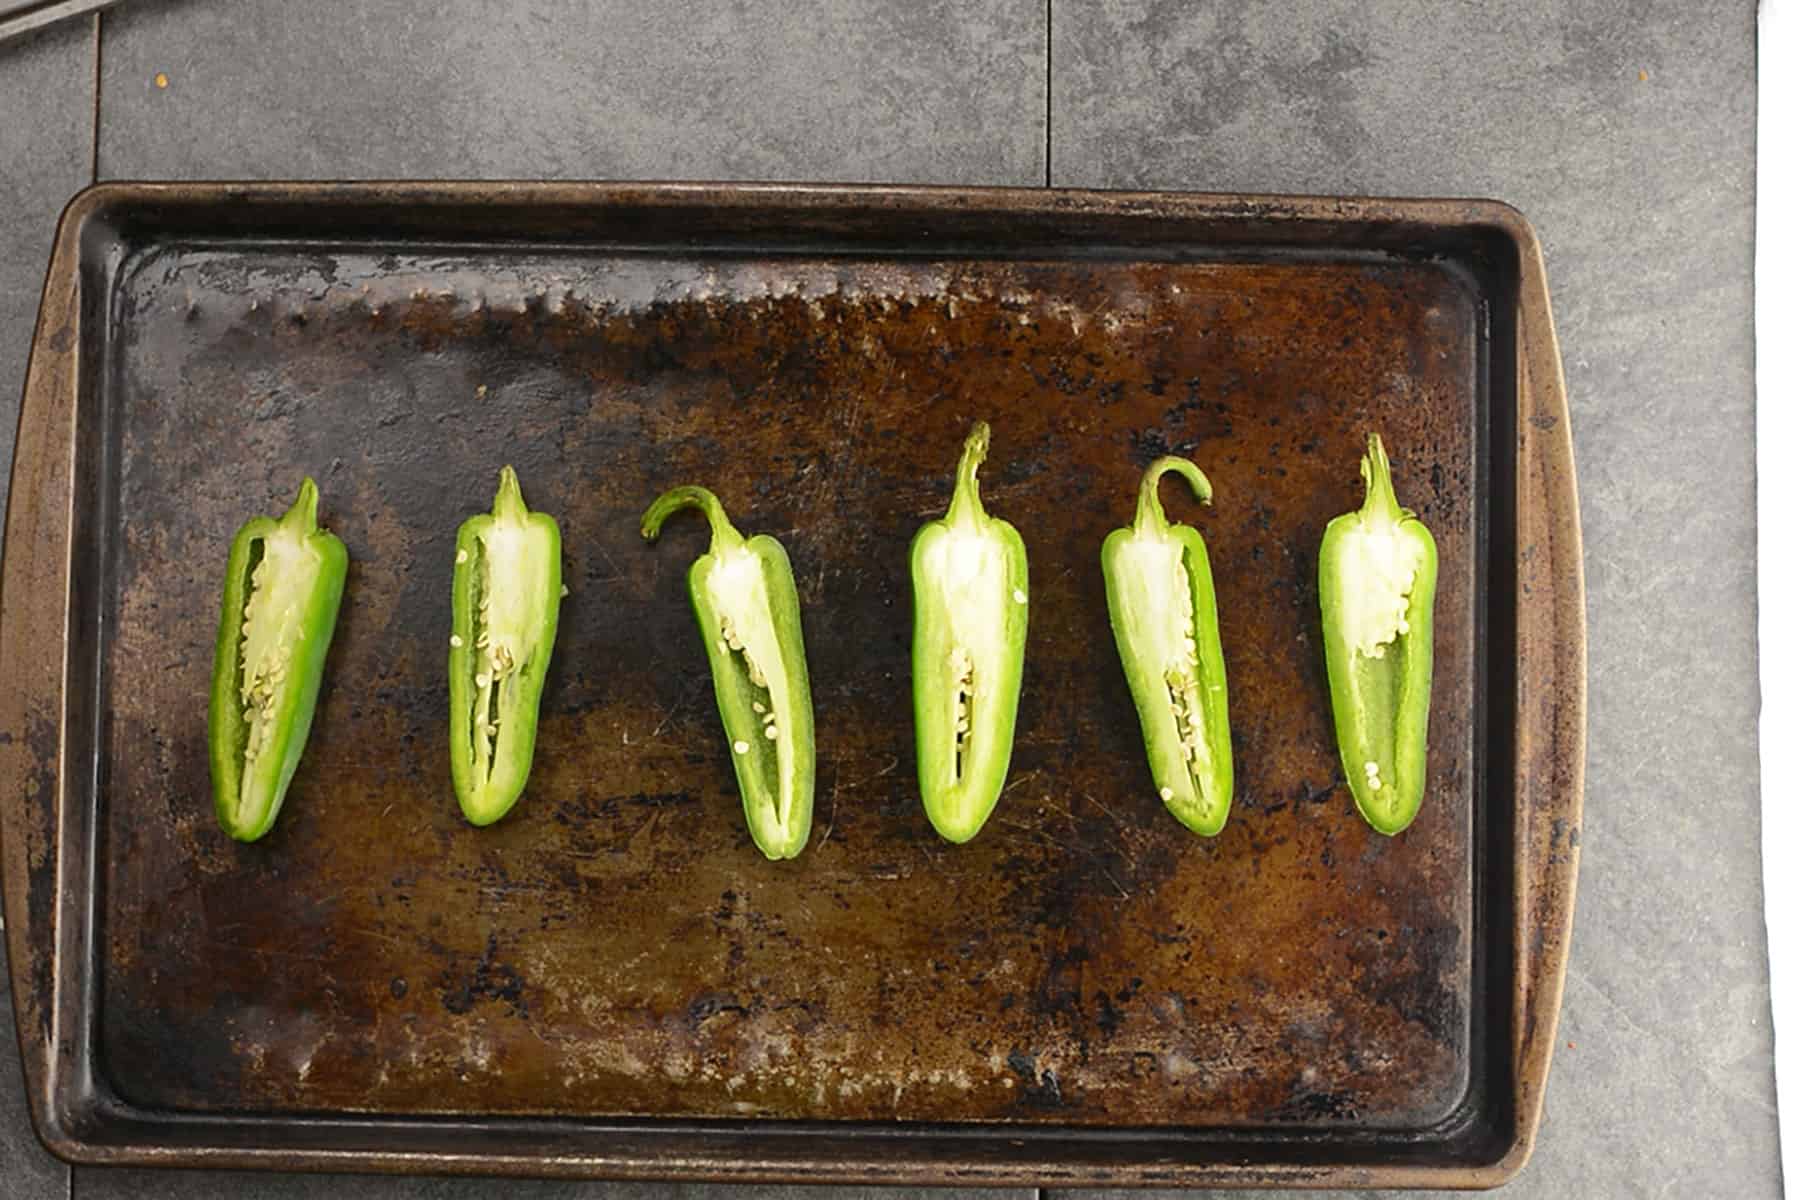 jalapenos are sliced and placed in a tray